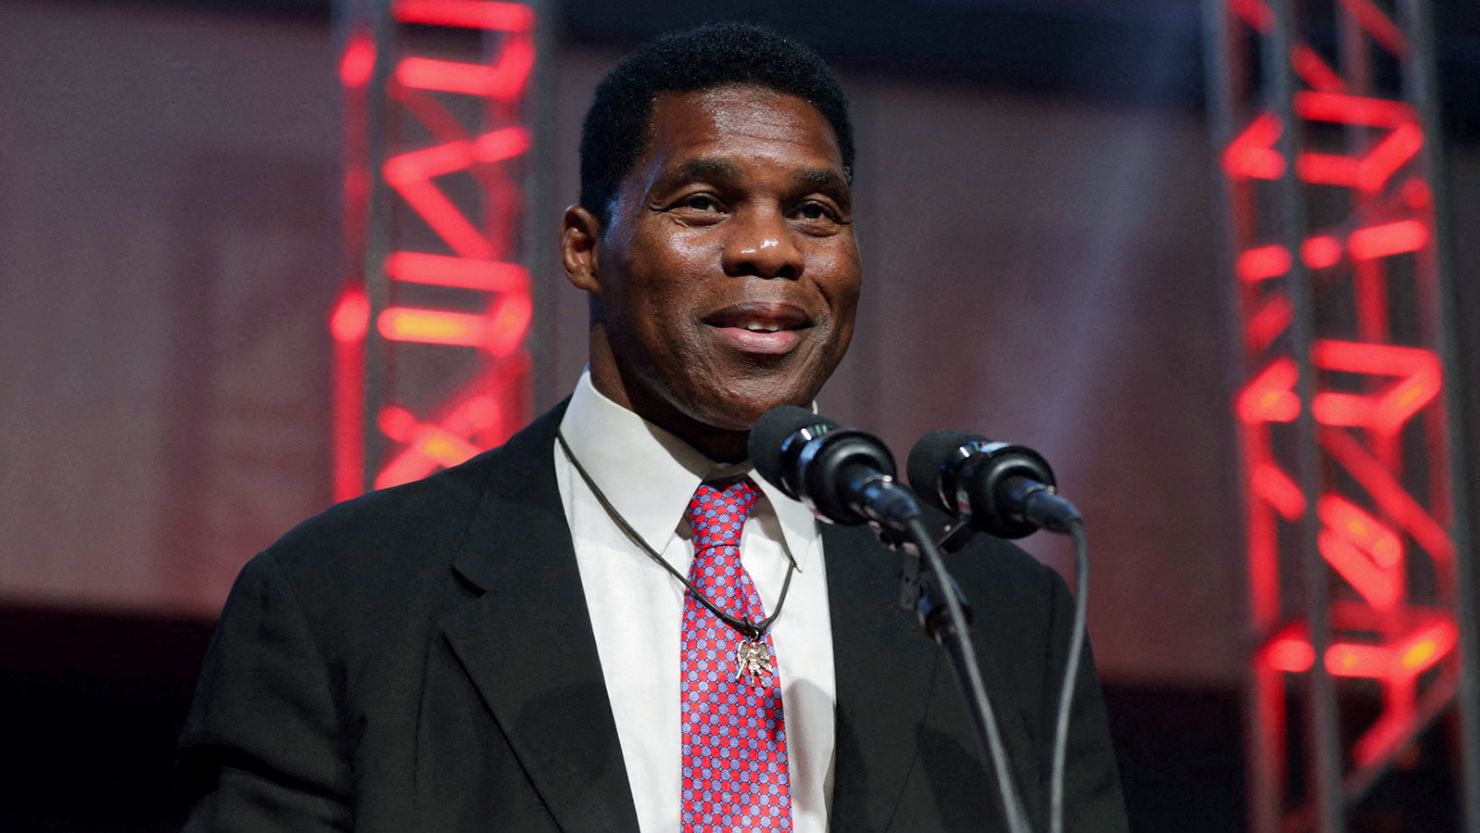 Georgia Republican Herschel Walker gives a concession speech during his election night party in Atlanta on December 6, 2022. 